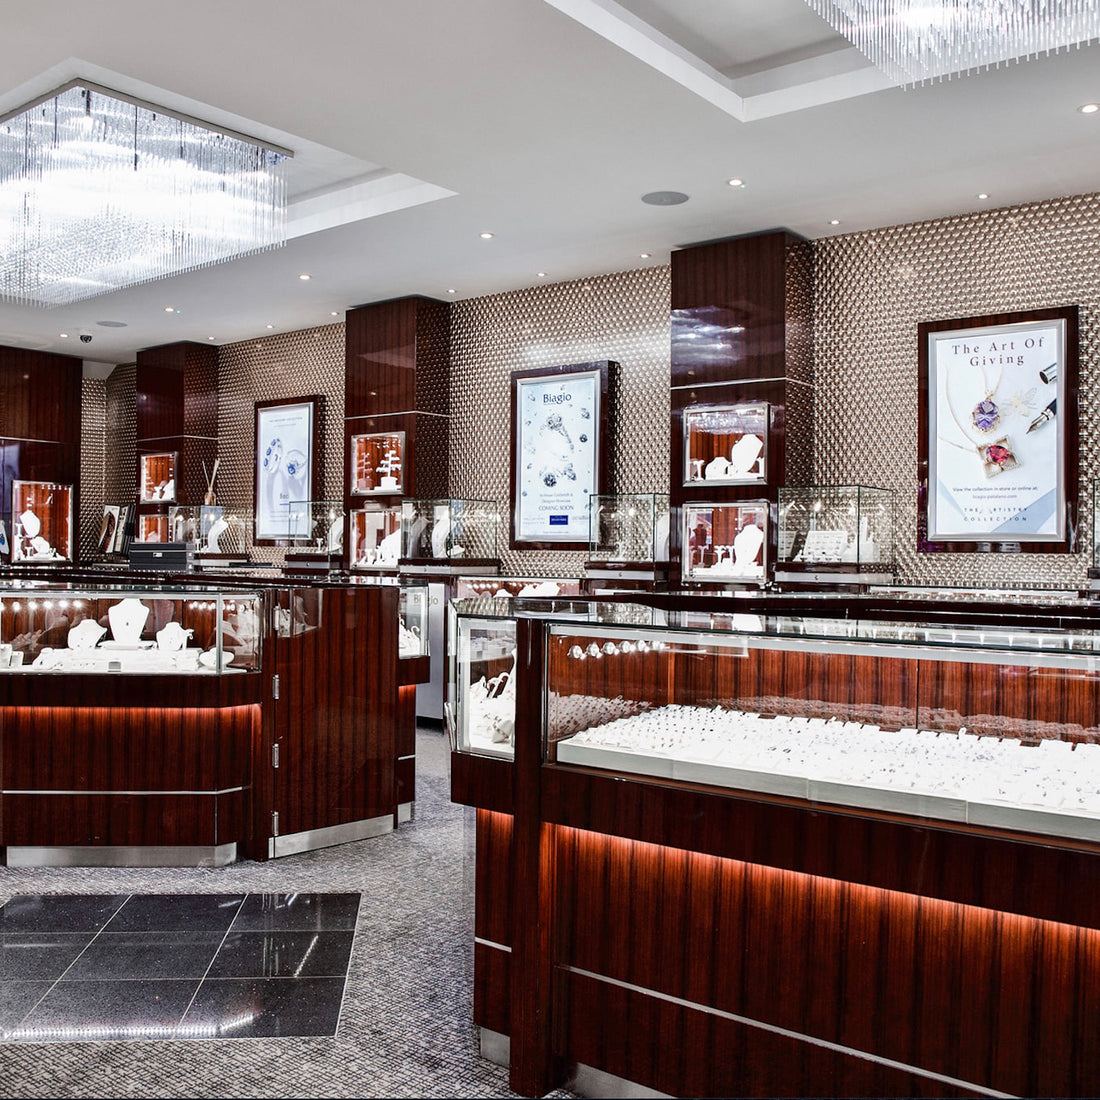 HIGH QUALITY DISPLAY CABINETS IN BIAGIO THE JEWELLER